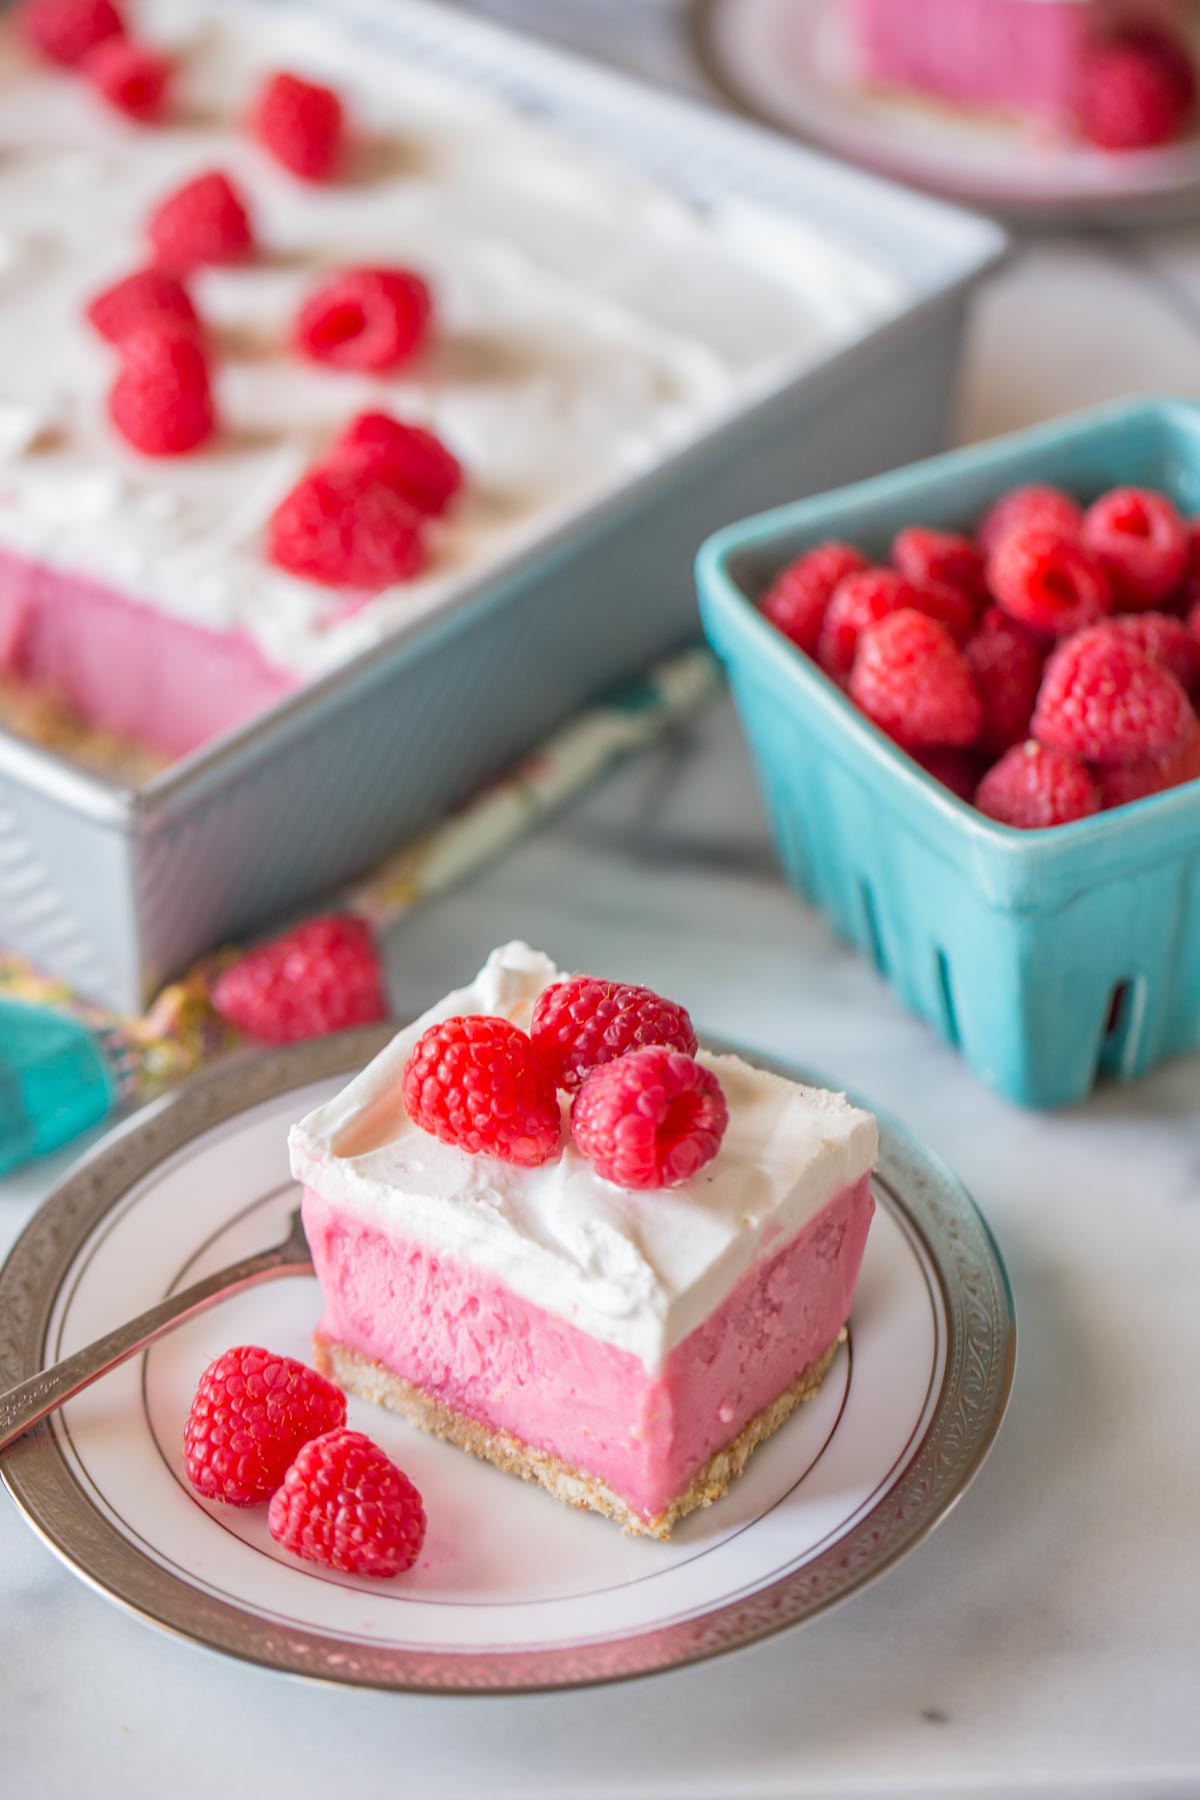 A piece of Cool and Creamy Raspberry Pretzel Dessert on a plate with fresh raspberries, and a carton of fresh raspberries in the background along with the baking pan of the Cool and Creamy Raspberry Pretzel Dessert. 